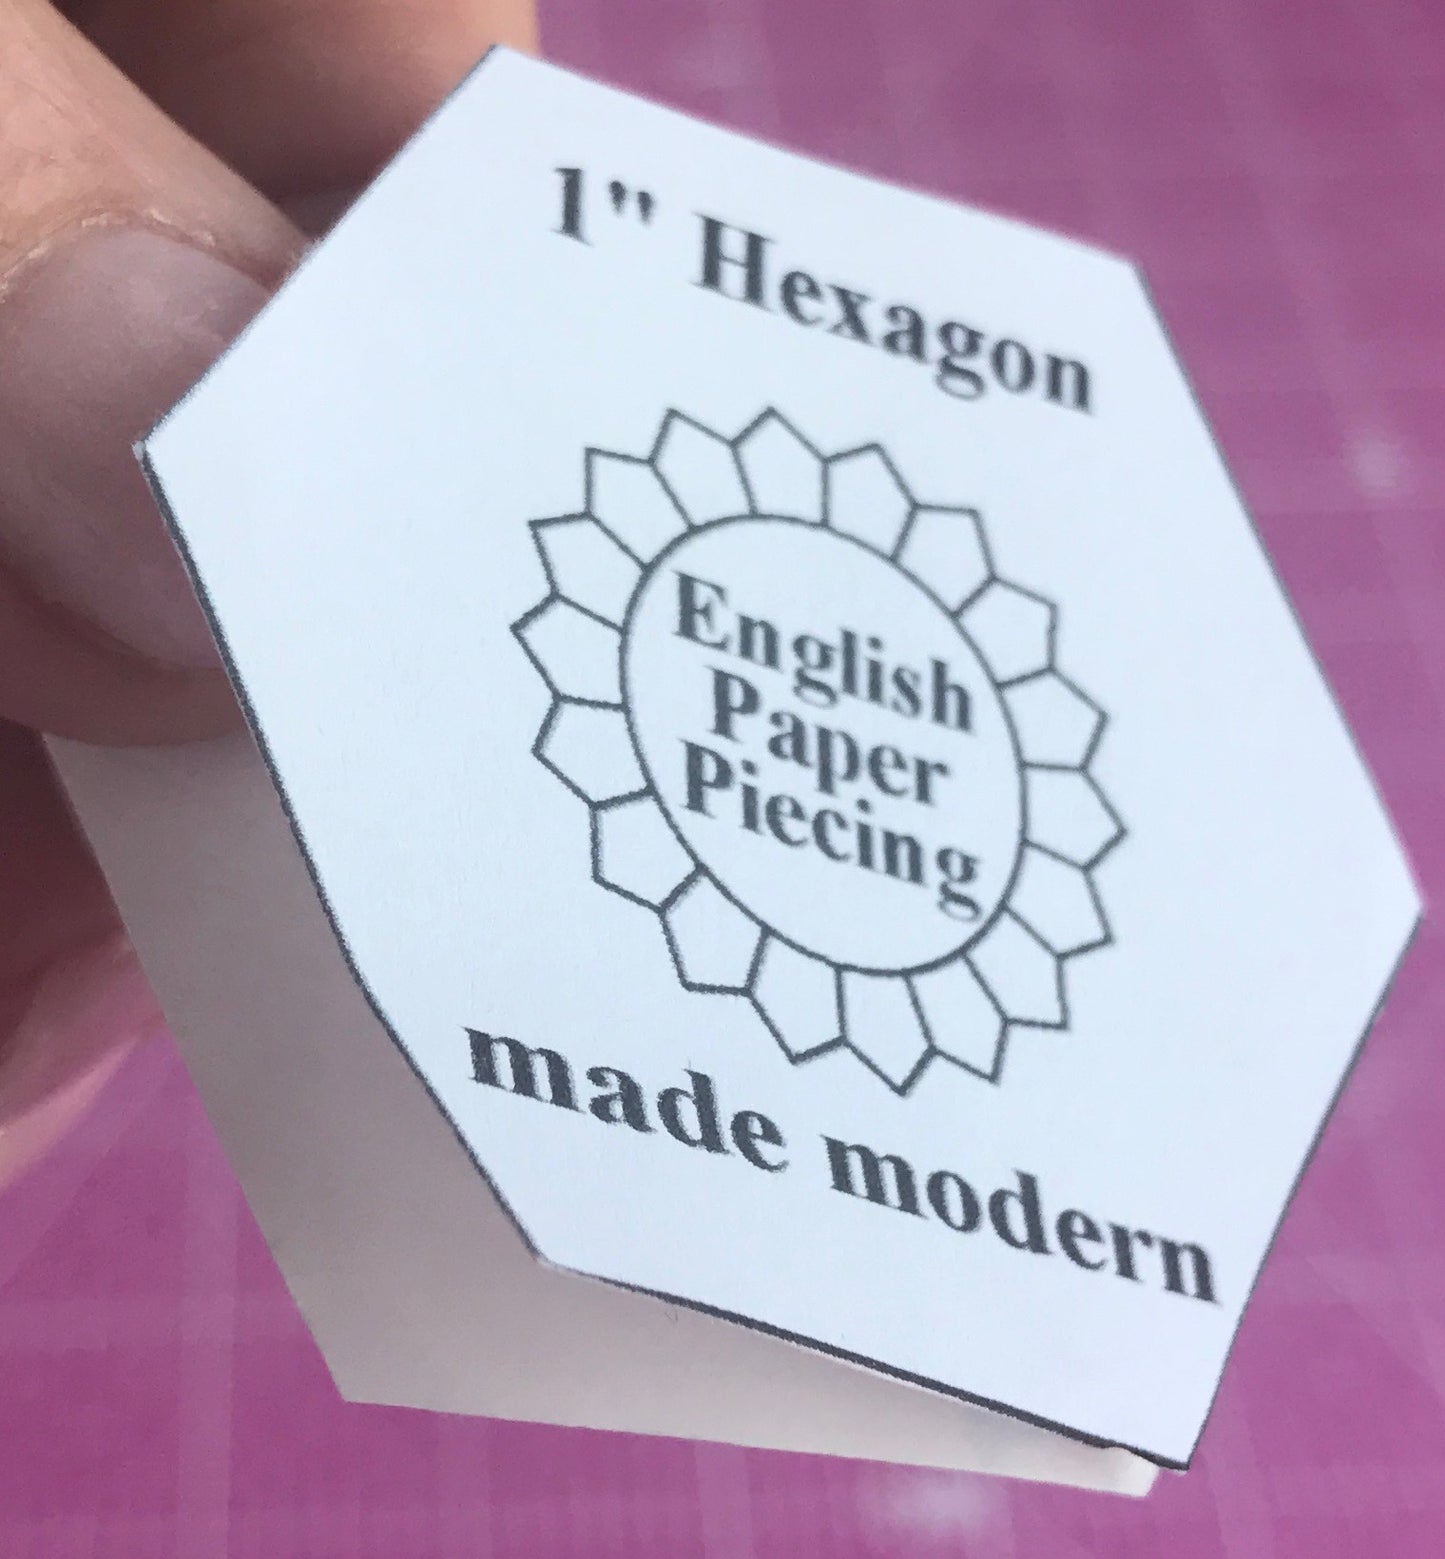 English Paper Piecing Made Modern Hexagons remove paper backing